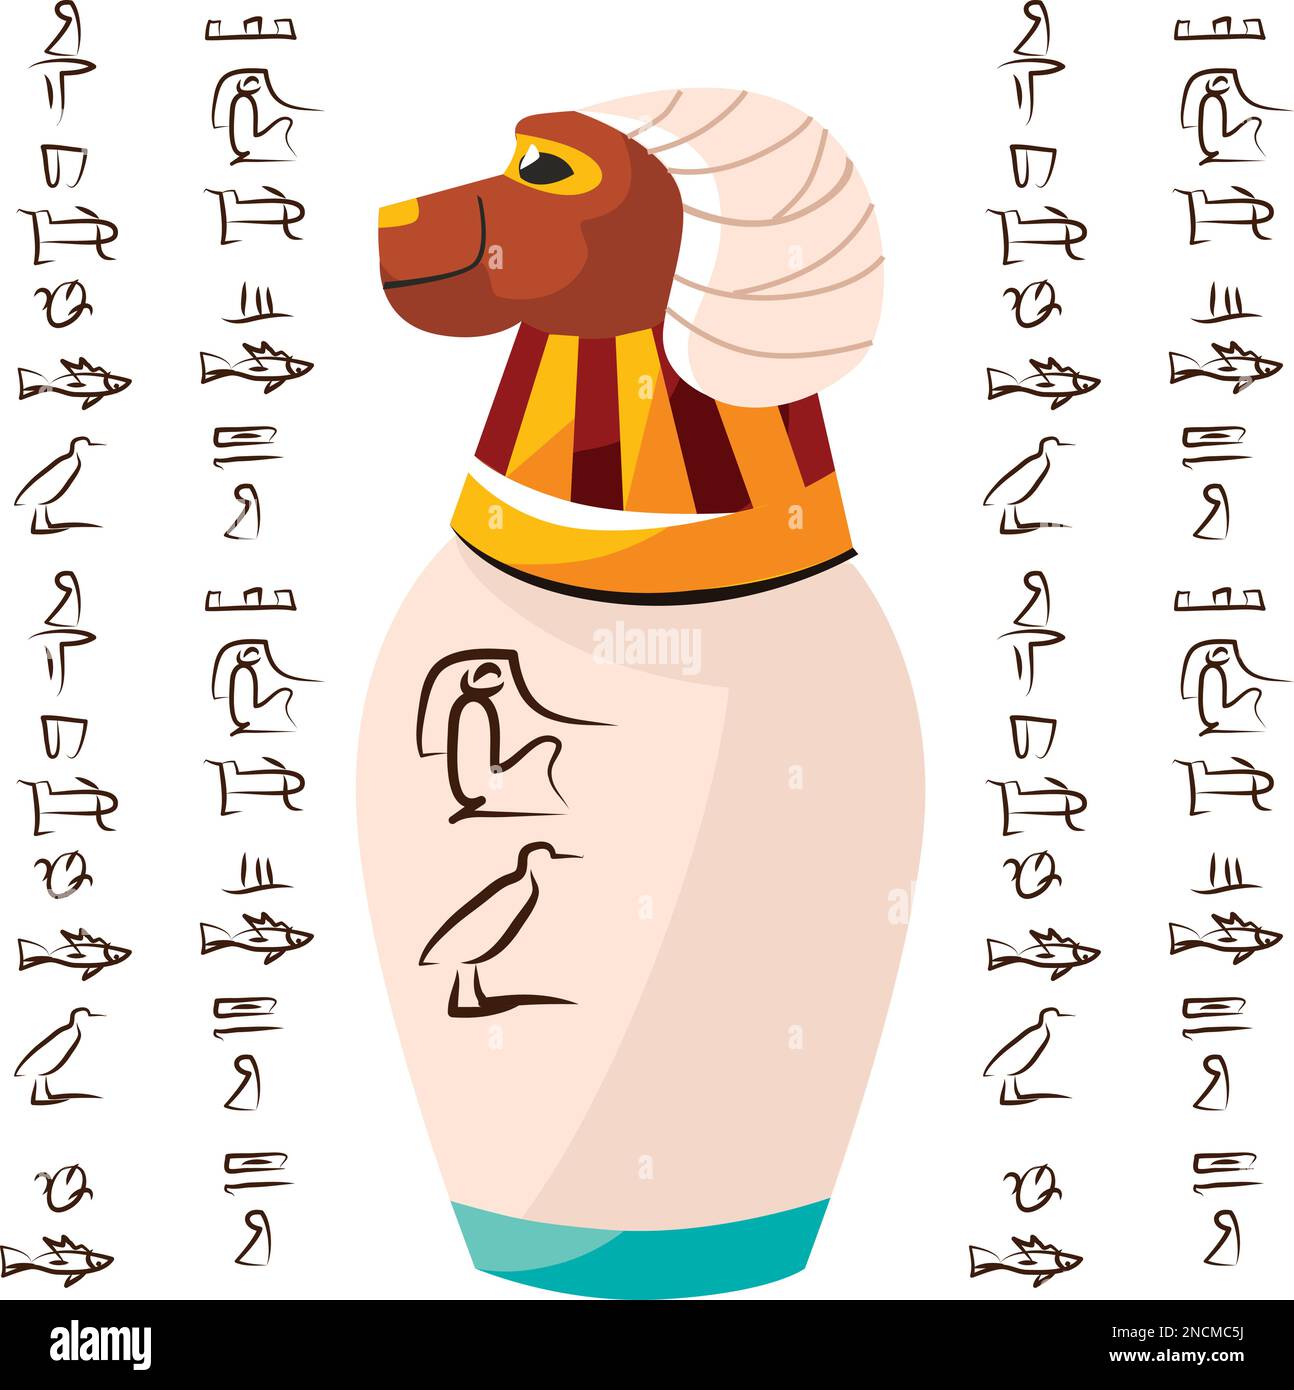 Ancient Egyptian ritual vase with ram head and hieroglyphs cartoons vector illustration. Decorative urn for sacrifice to god Khnum or storage of temple treasures, isolated on white background Stock Vector